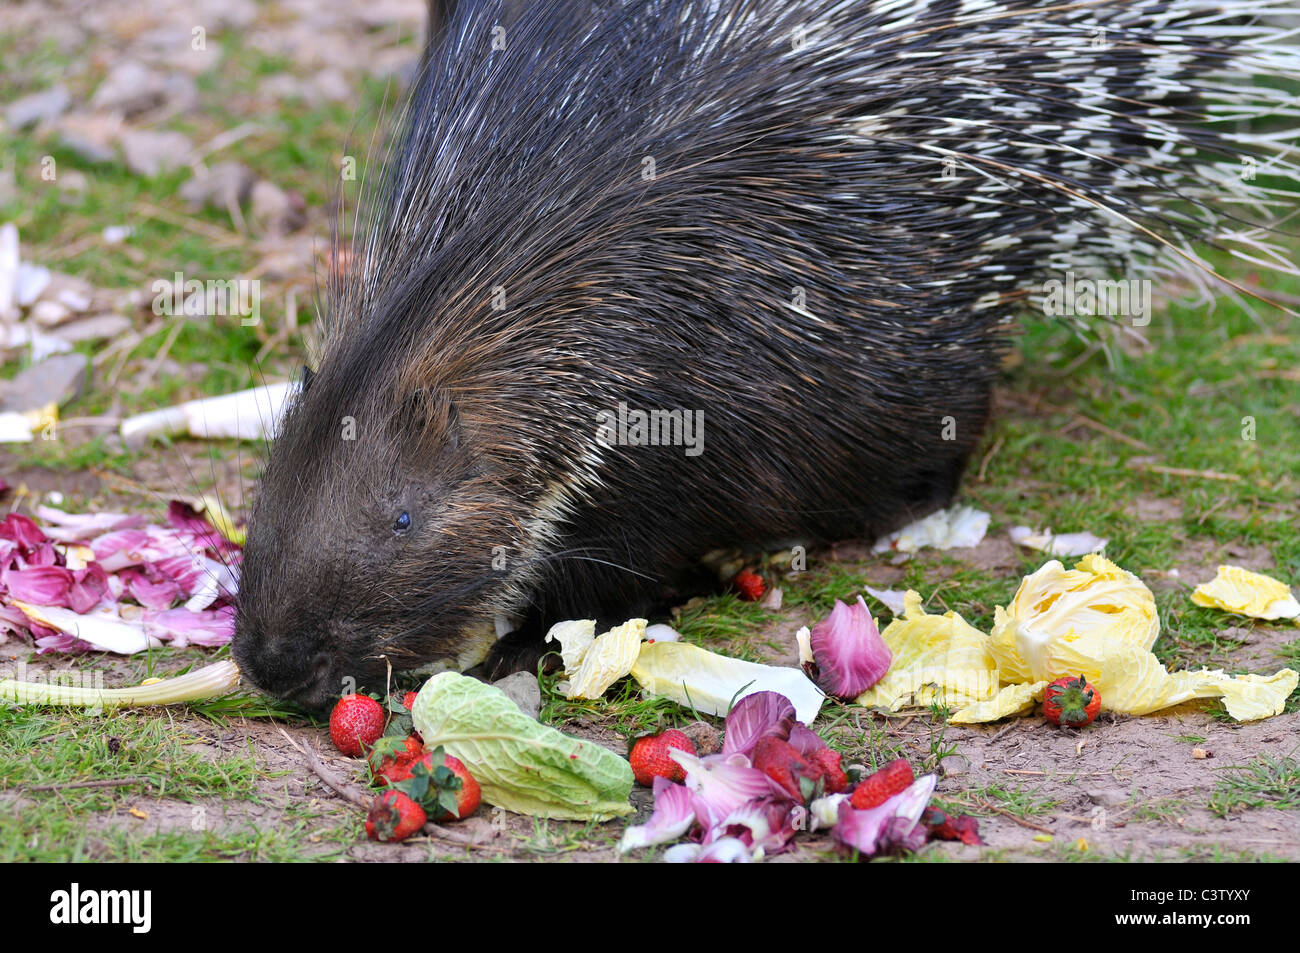 Closeup Indian Crested Porcupine (Hystrix indica) eating vegetables Stock Photo